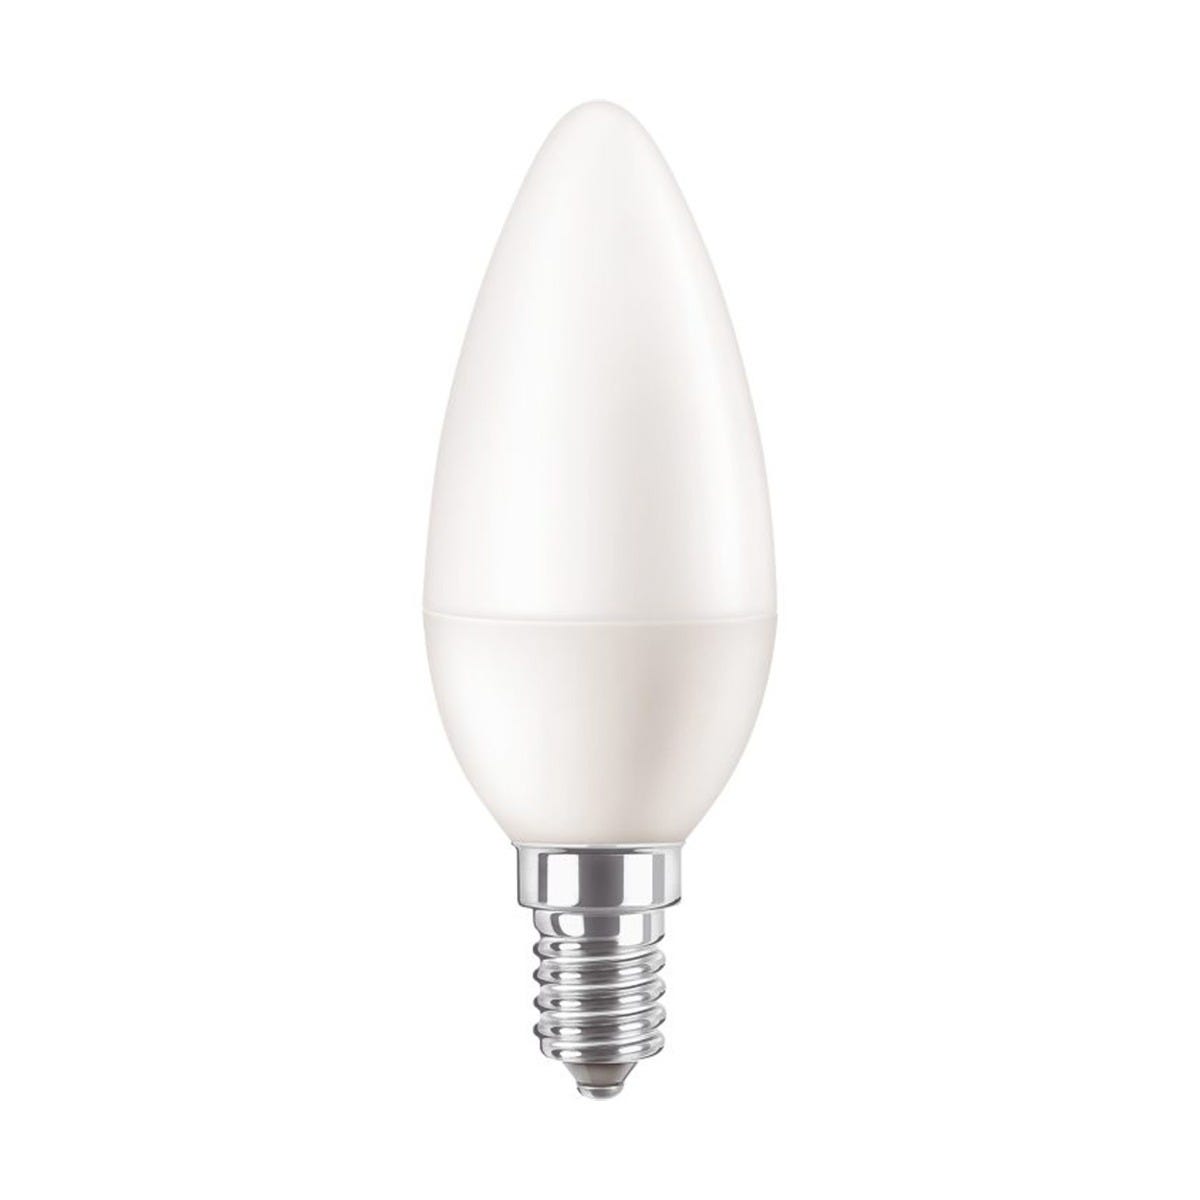 Philips ampoule LED capsule GY6.35 1,7W blanc chaud